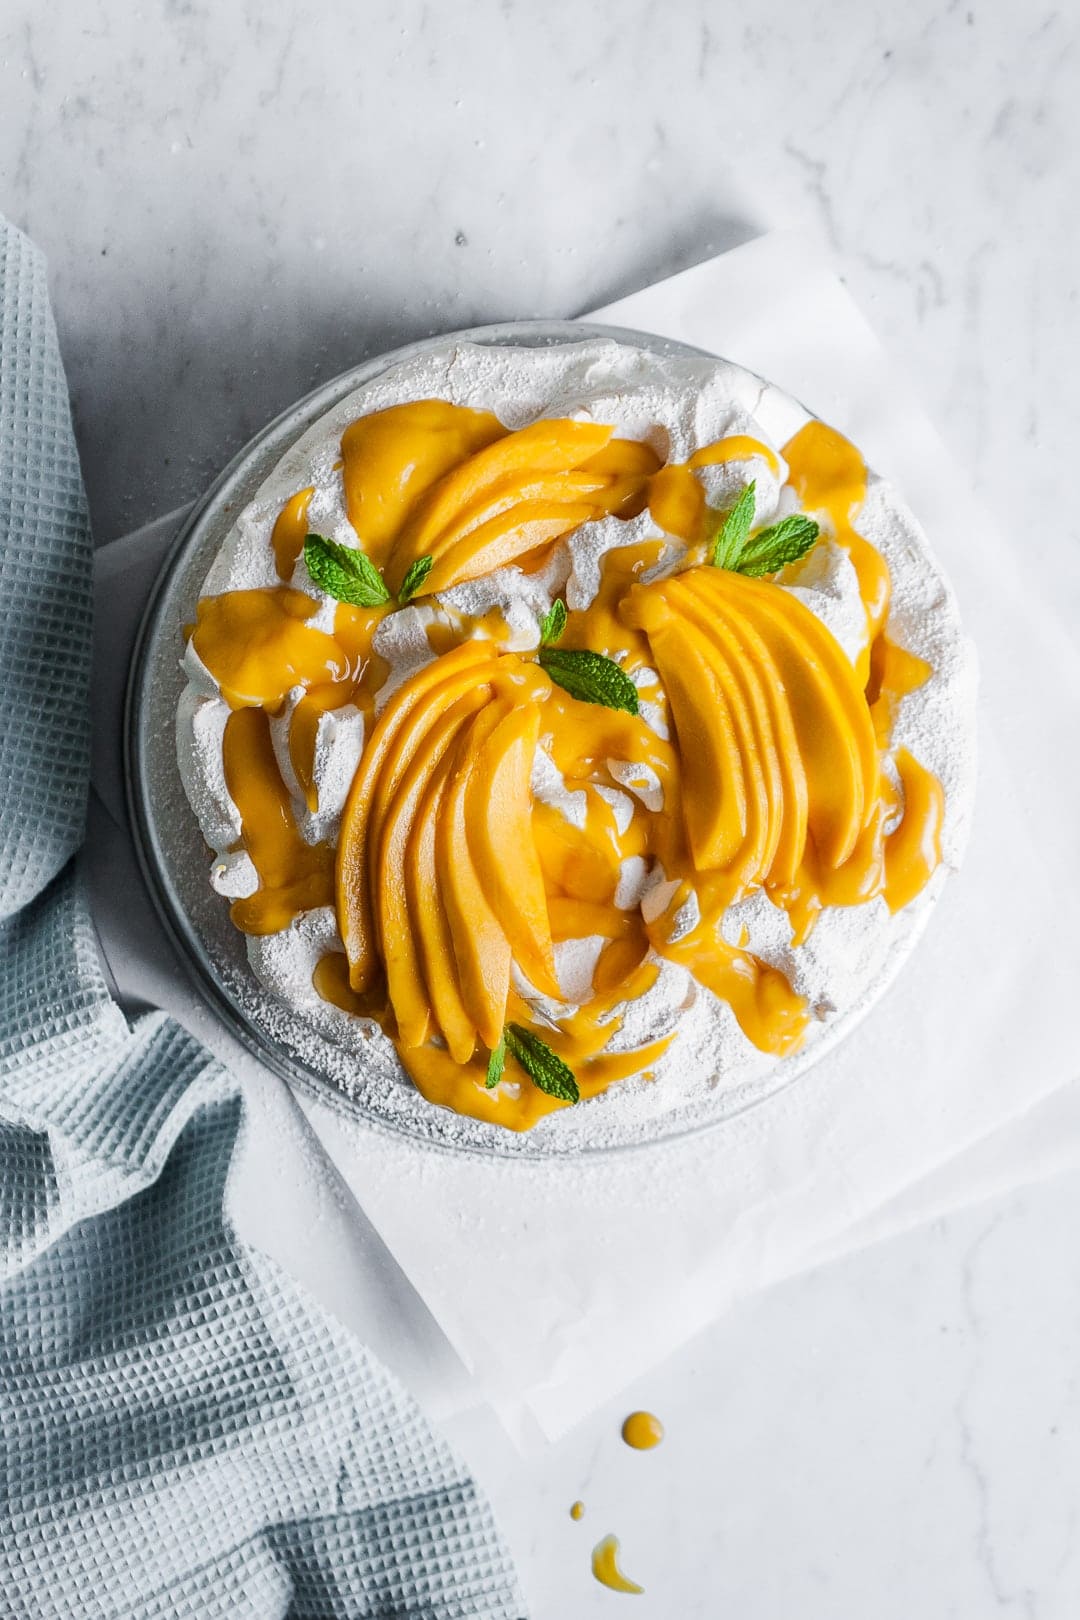 Top view of meringue cake with mango sauce and sliced mangoes on top, garnished with mint leaves on a white marble background